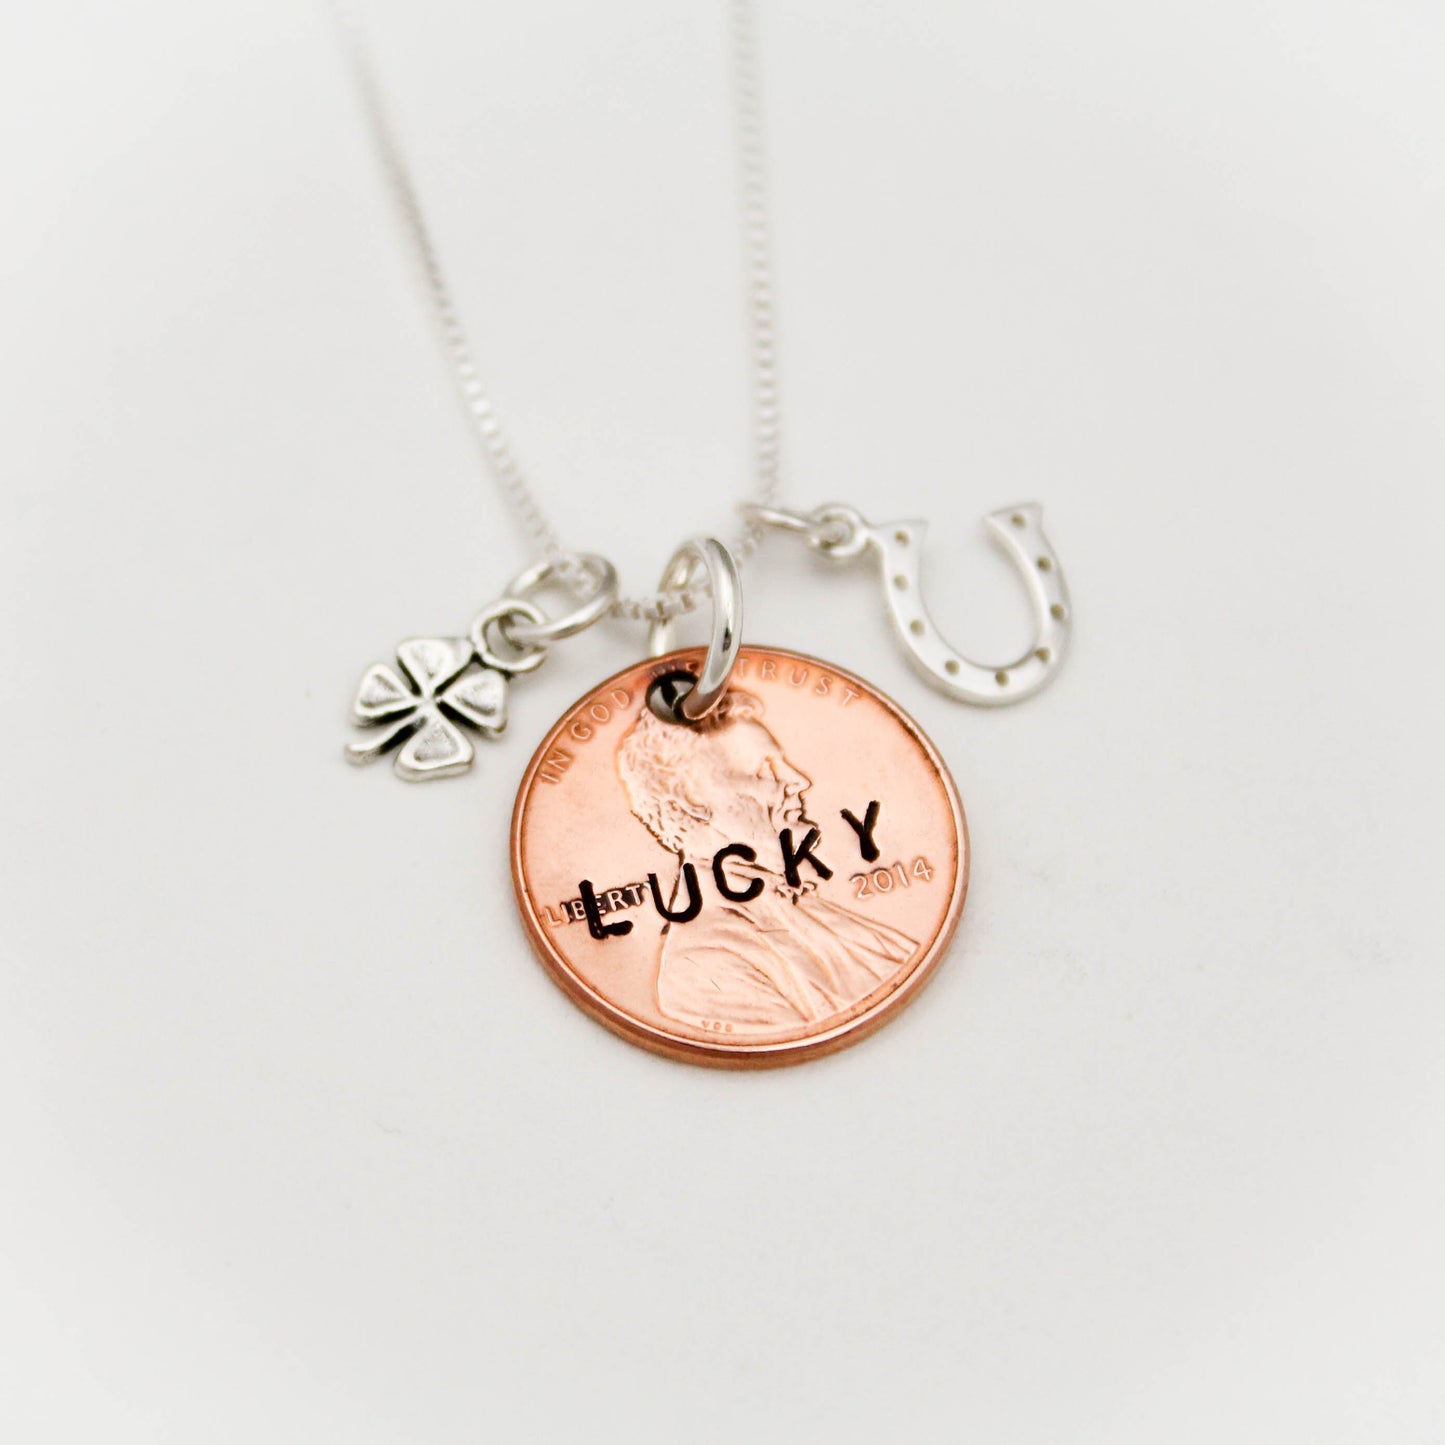 Lucky Penny Necklace, Choose Your Penny Year, Personalized, Sterling Silver Necklace with Initial and Birthstone,  Hand Stamped Jewelry